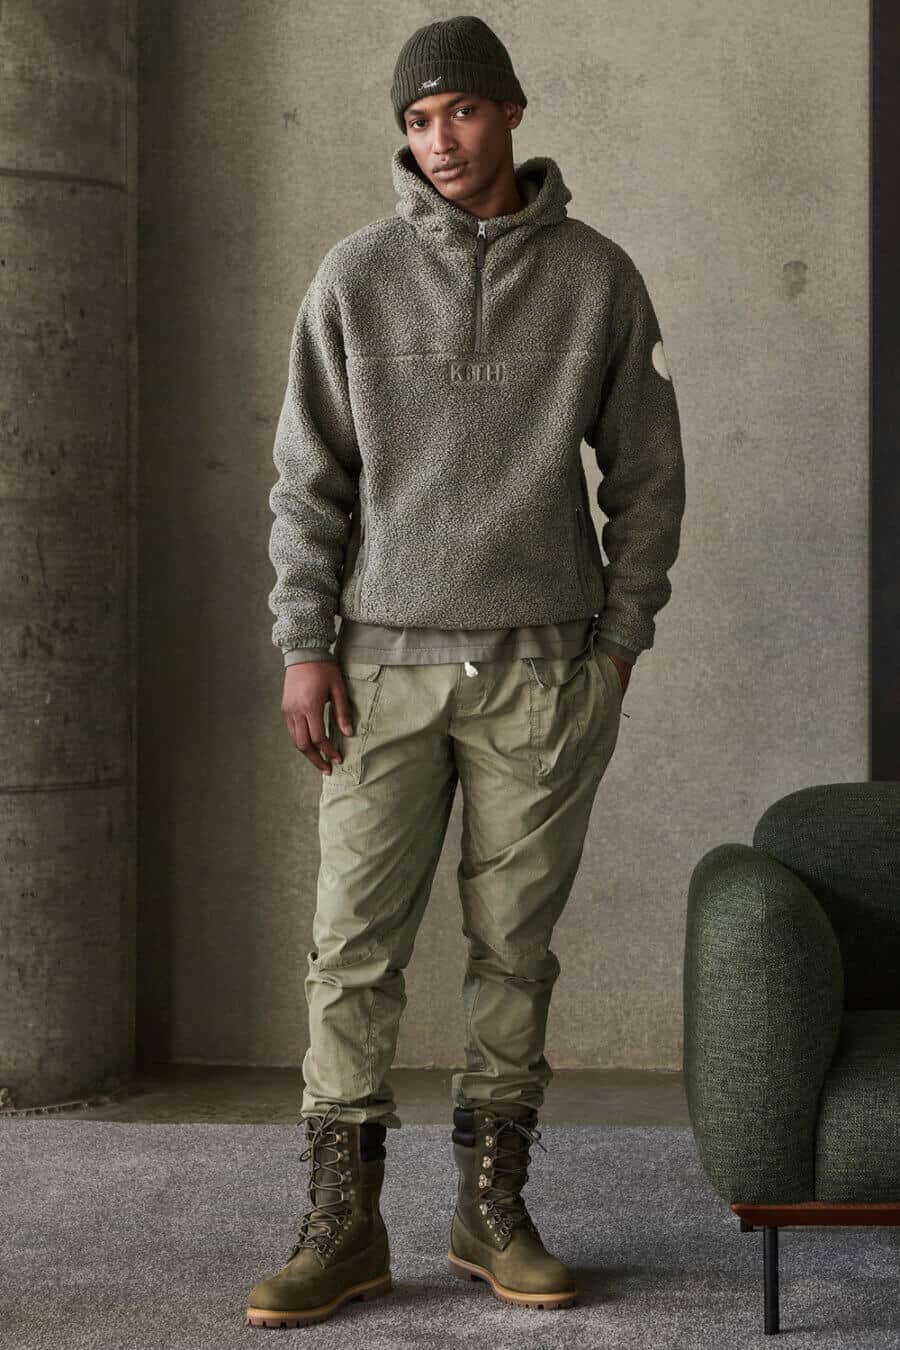 Men's green utility pants with a fleece and boots streetwear outfit